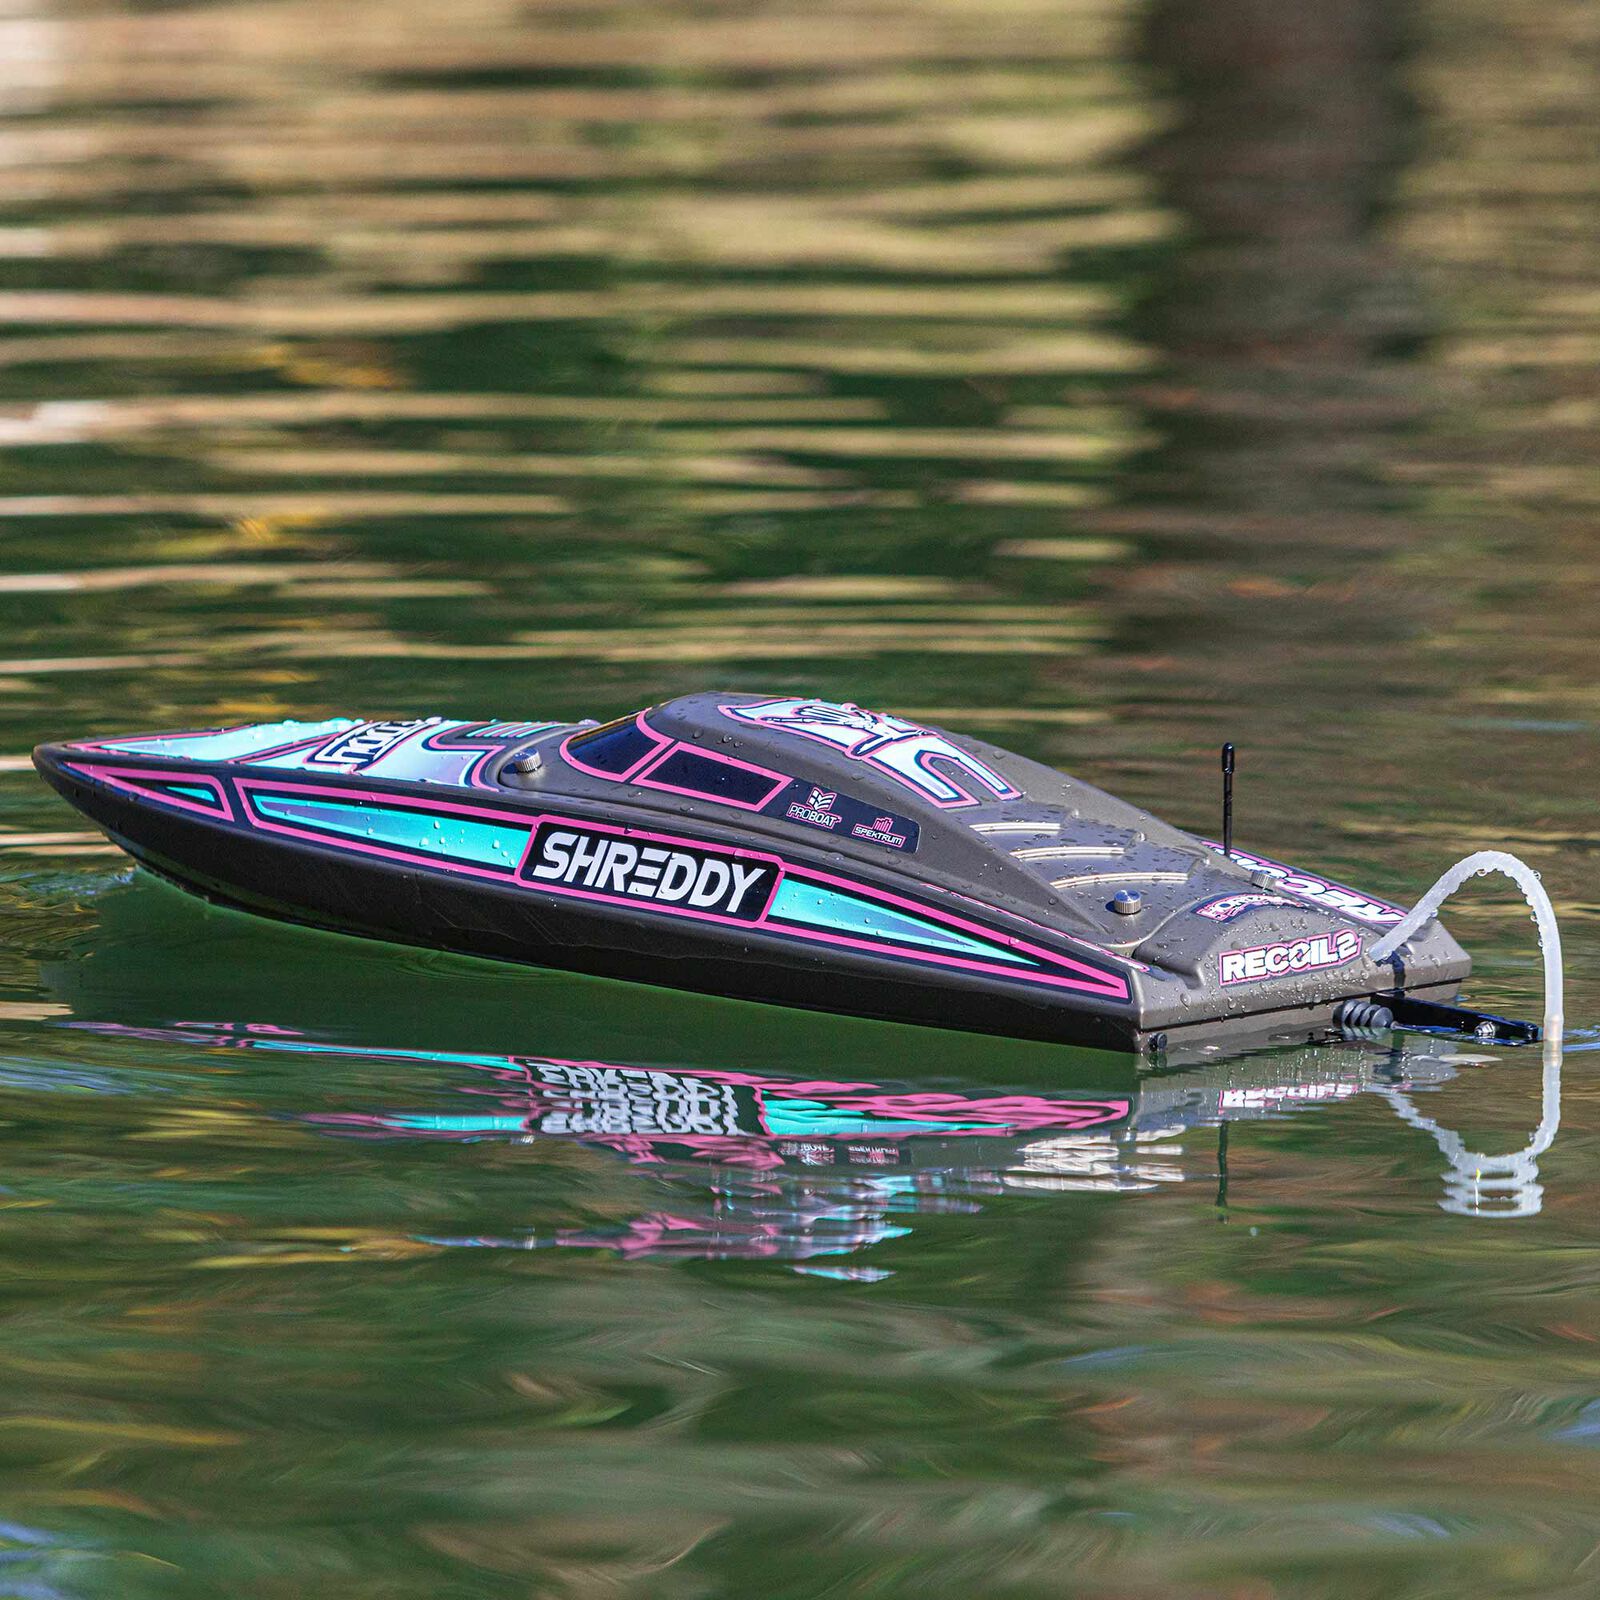 Proboat PRB08041T2 - Recoil 2 26-inches Self-Righting Brushless Deep-V RTR, Shreddy